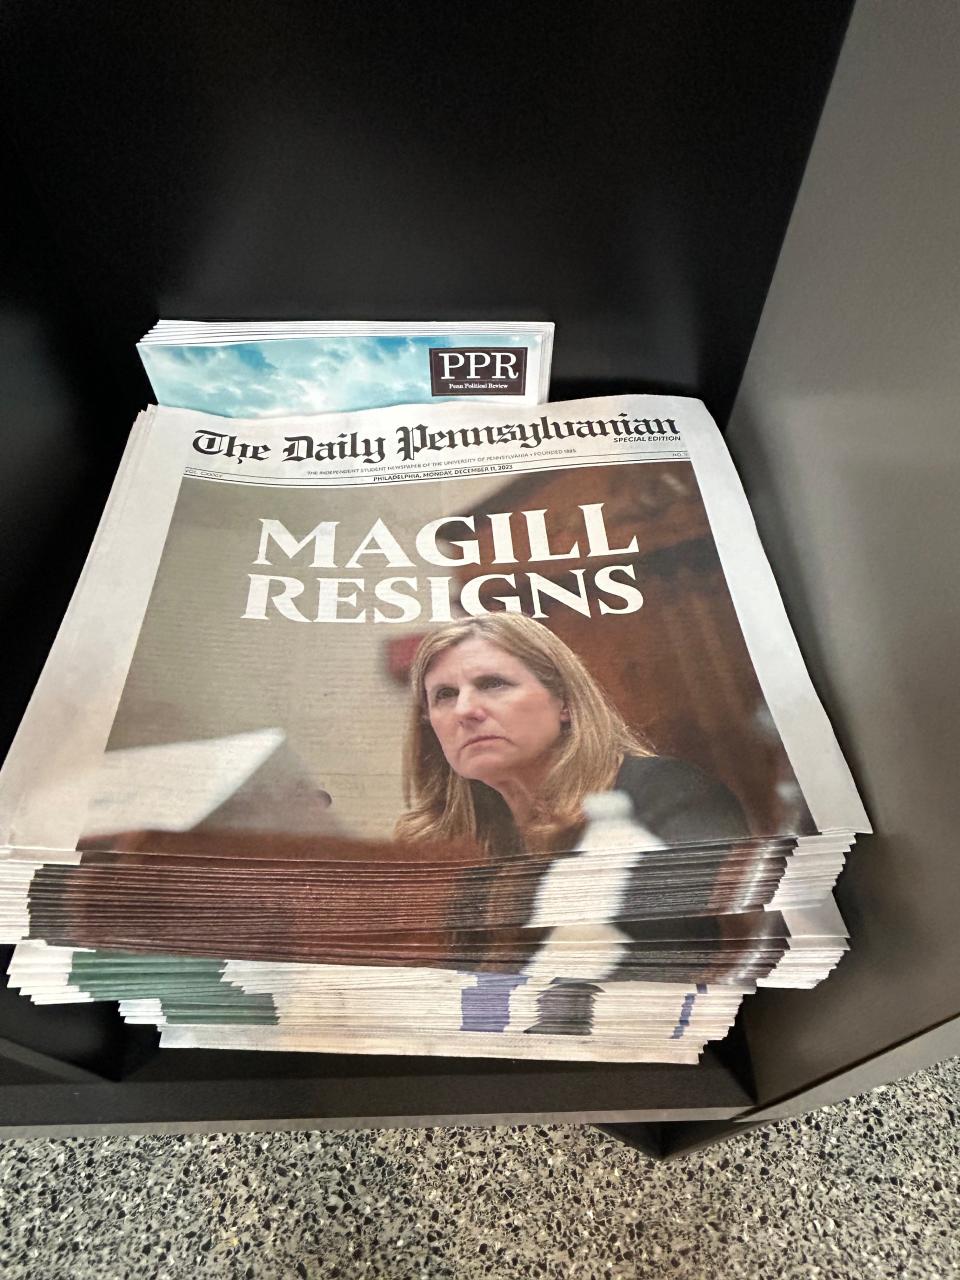 A special edition of the Daily Pennsylvanian, the University of Pennsylvania's student newspaper, reports on the resignation of president Liz Magill.